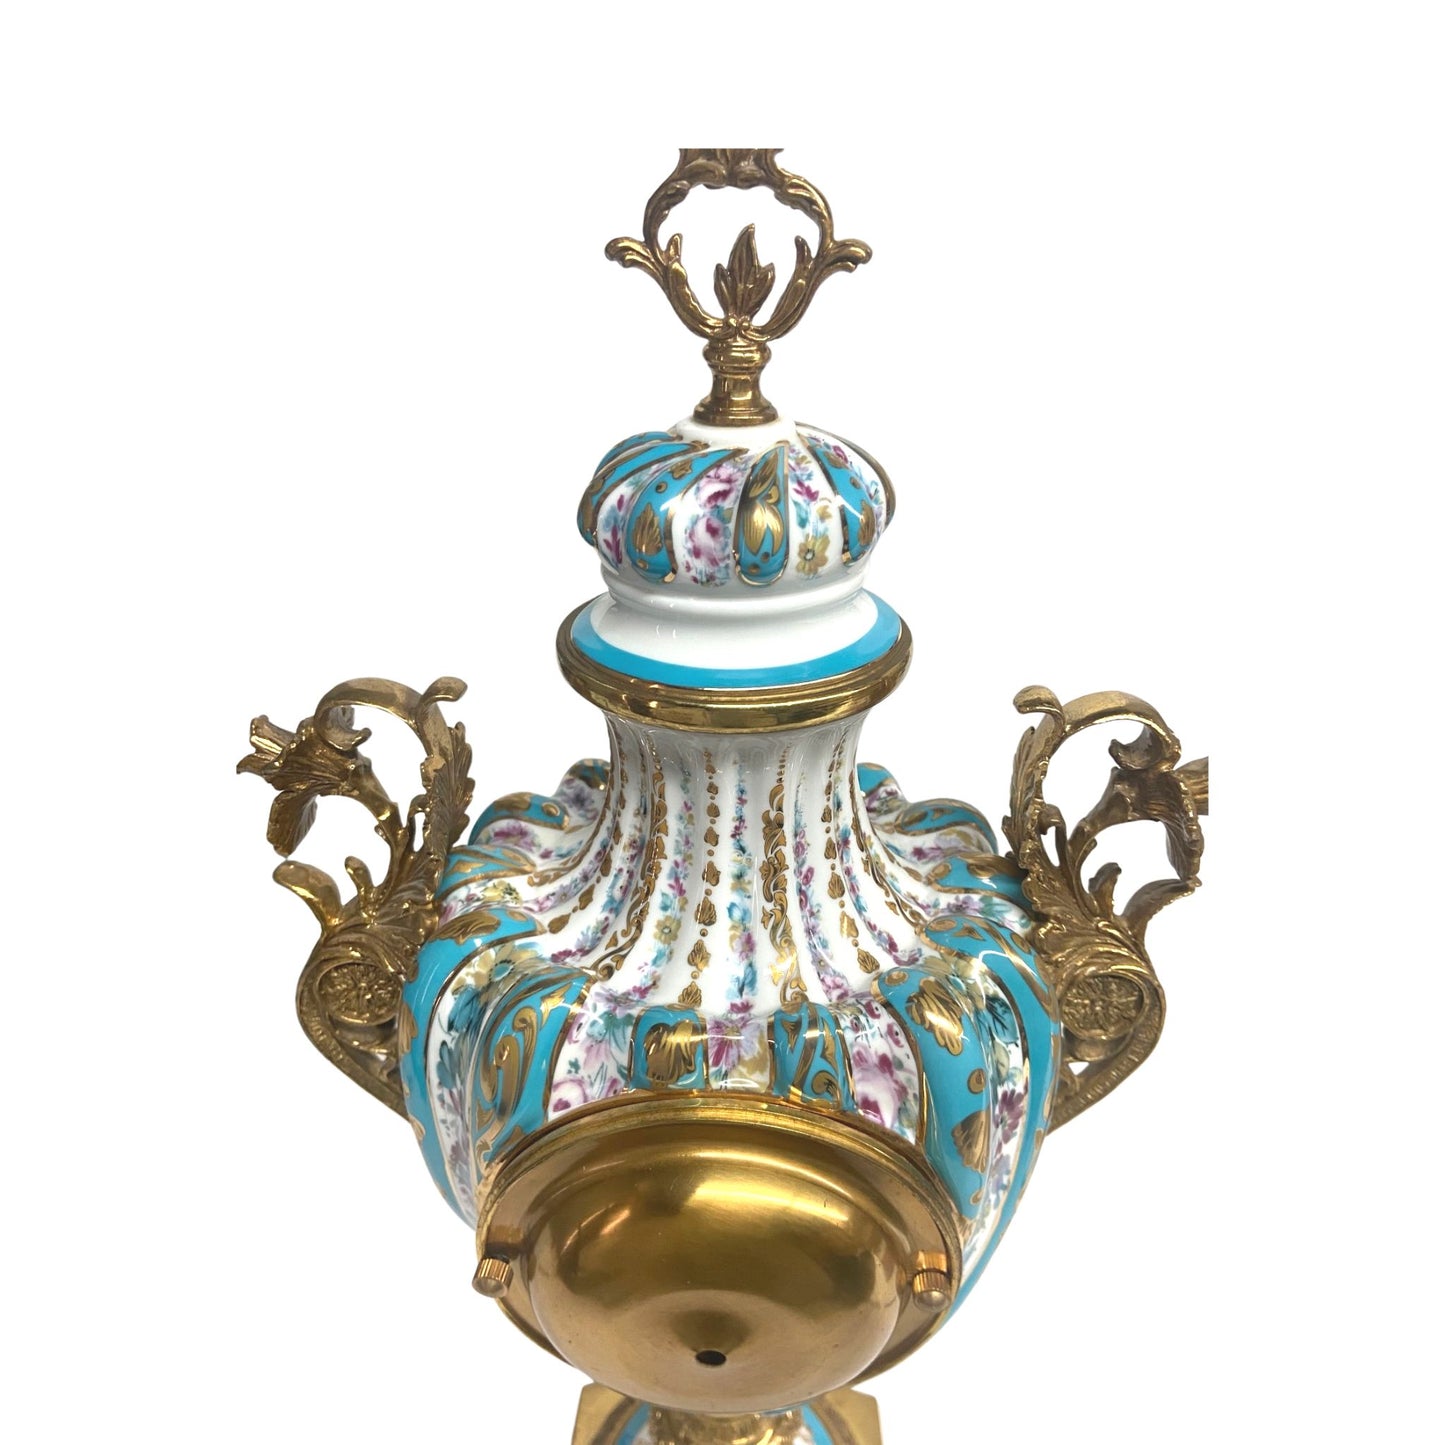 Bronze and Porcelain Hand-painted Urn With Clock